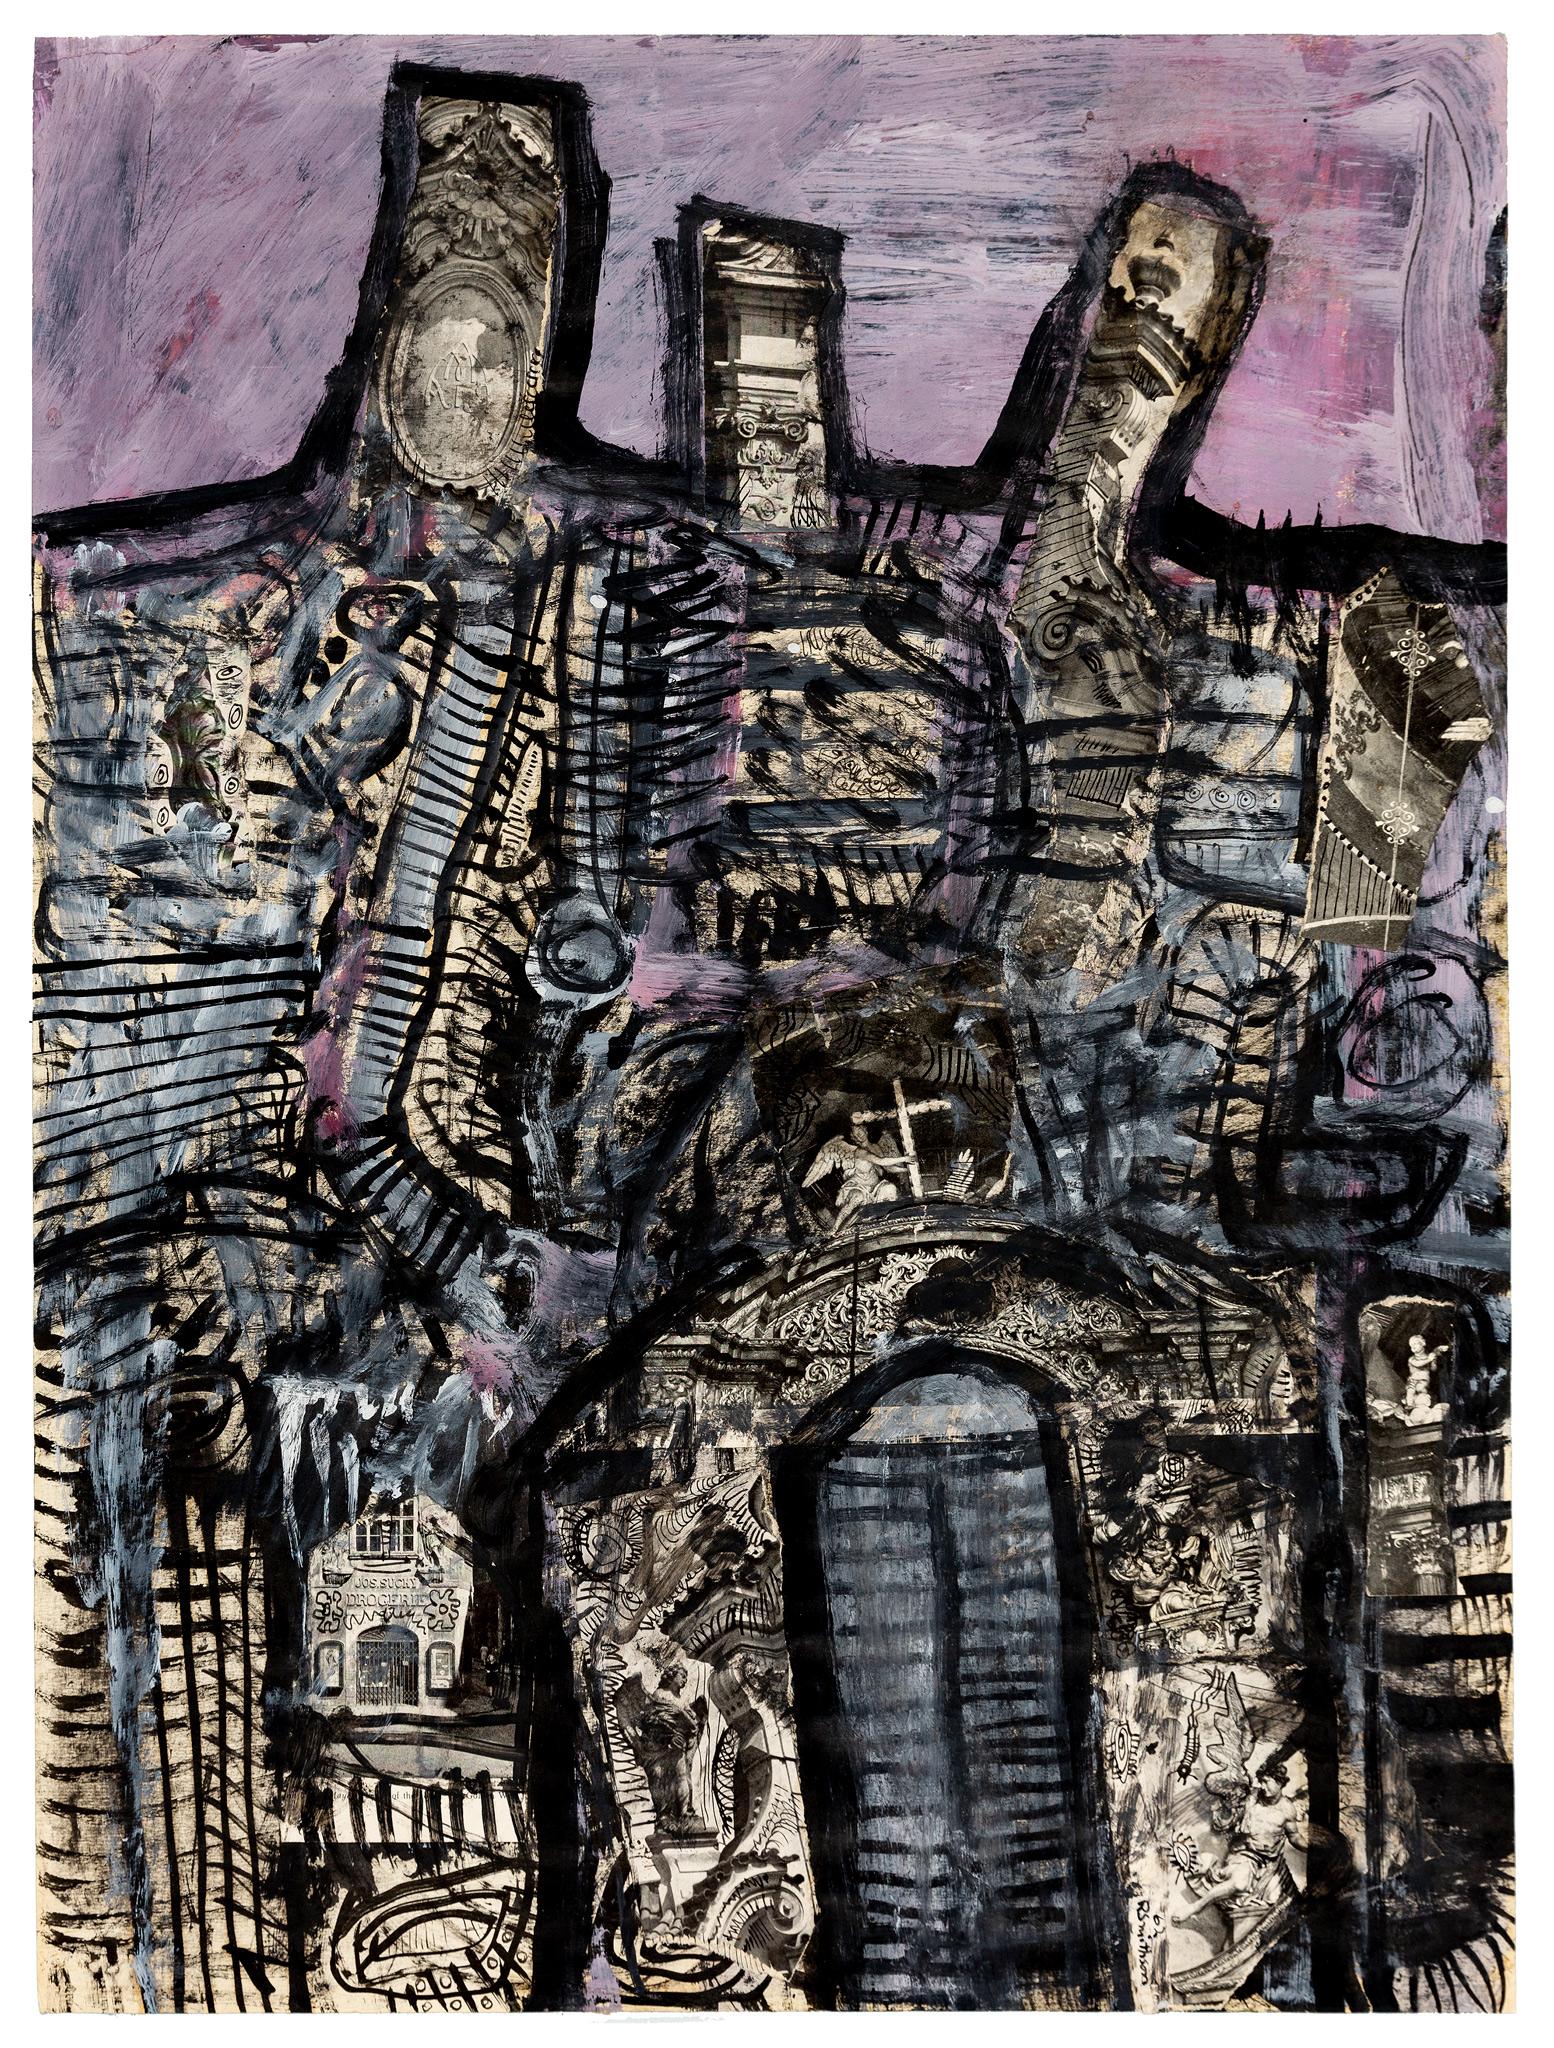 chaotic painting with heavy black lines outlining architectural forms with a faint purple sky